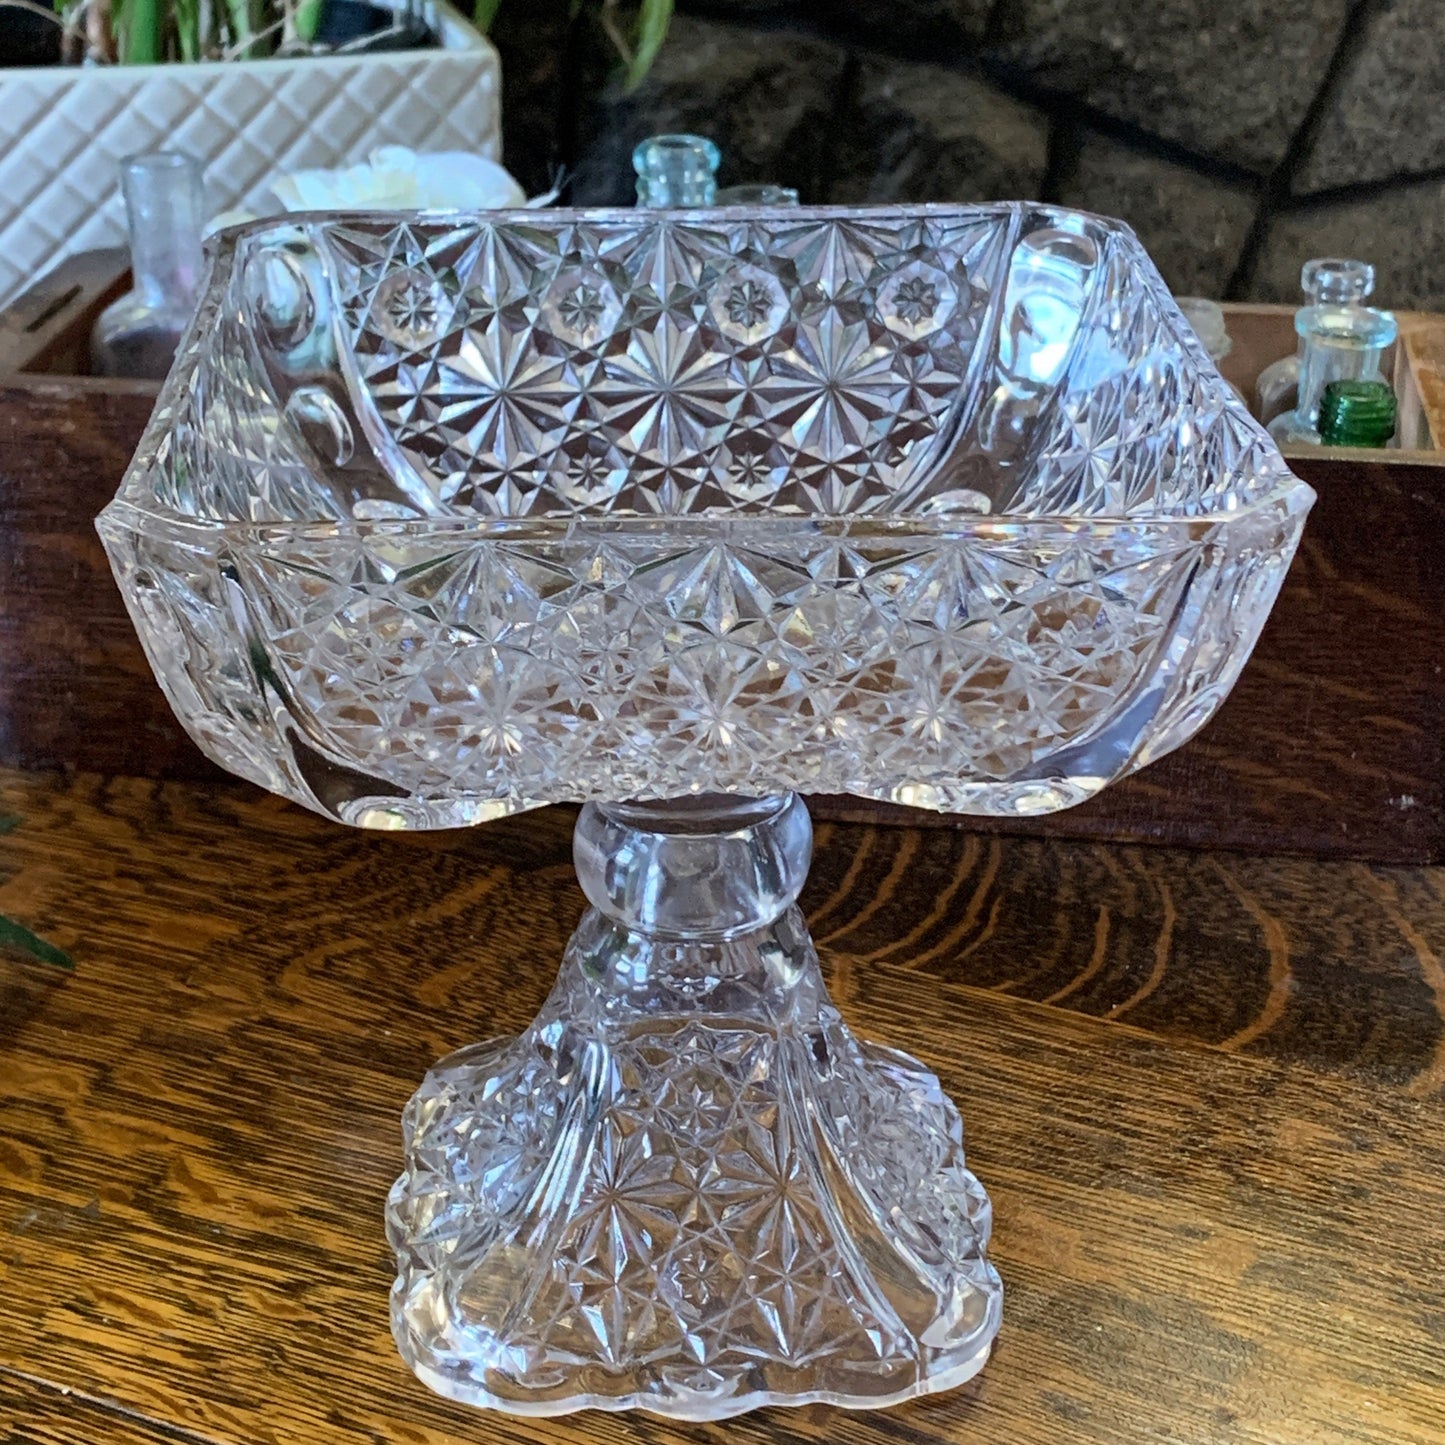 Tall Pressed Glass Dish, Vintage Glass Fruitbowl